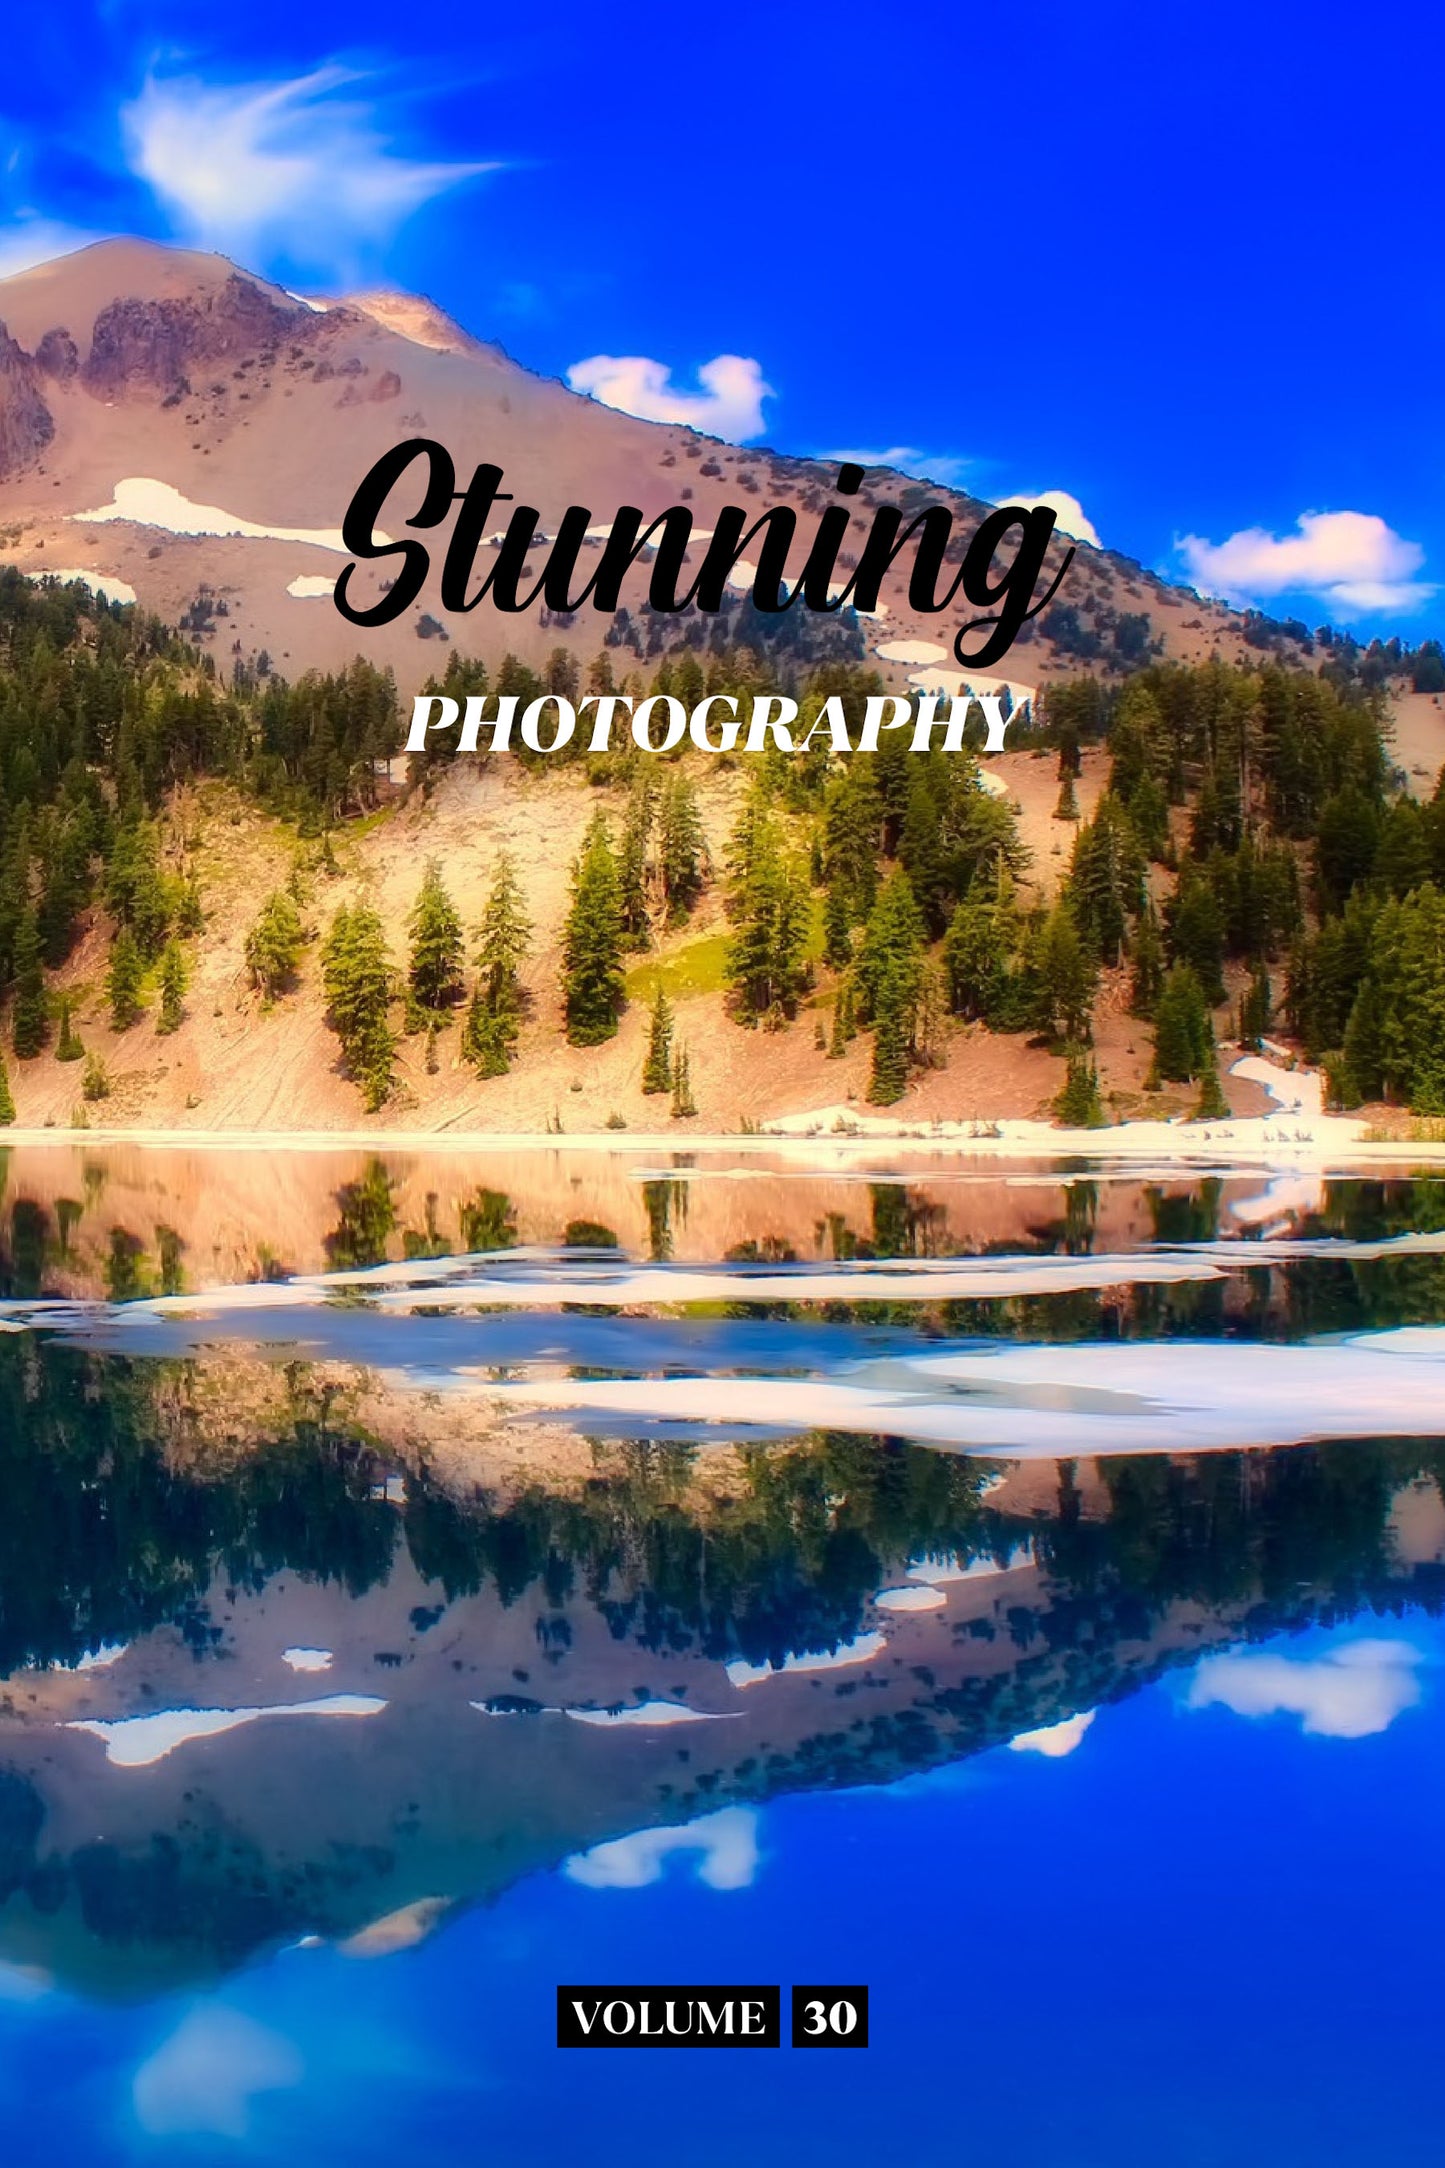 Stunning Photography Volume 30 (Physical Book Pre-Order)